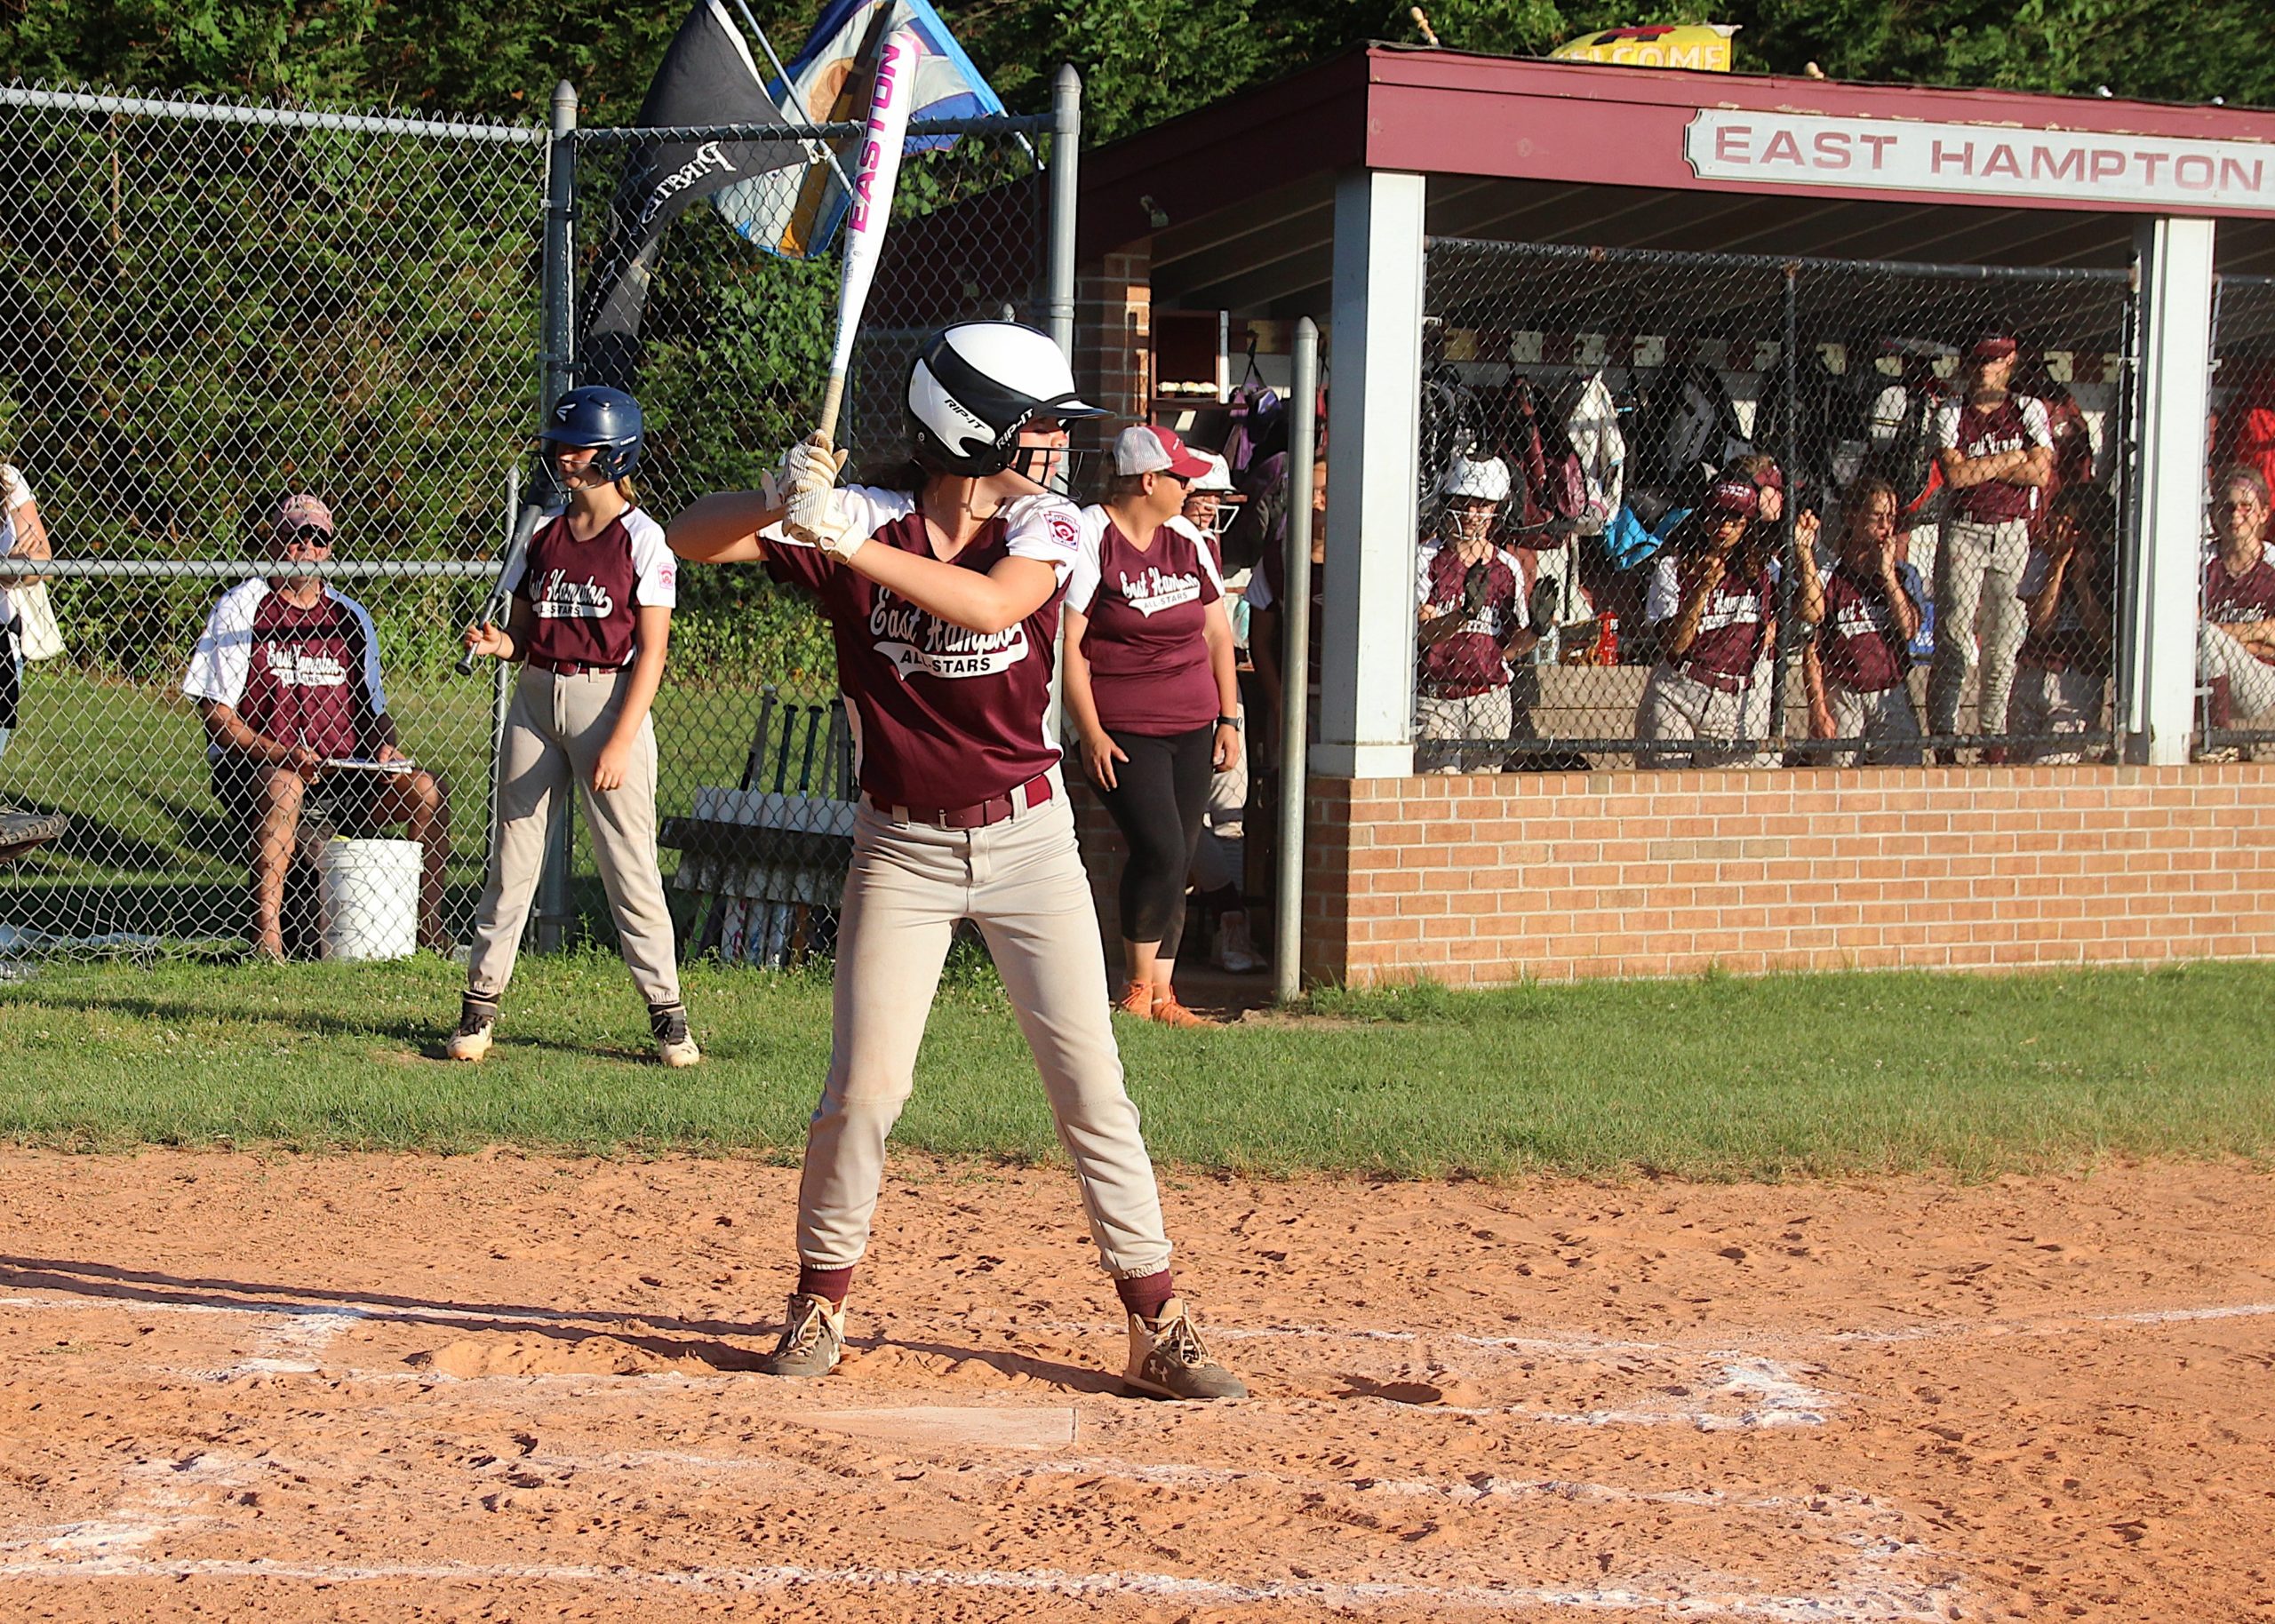 Colleen McKee gets set for a pitch.